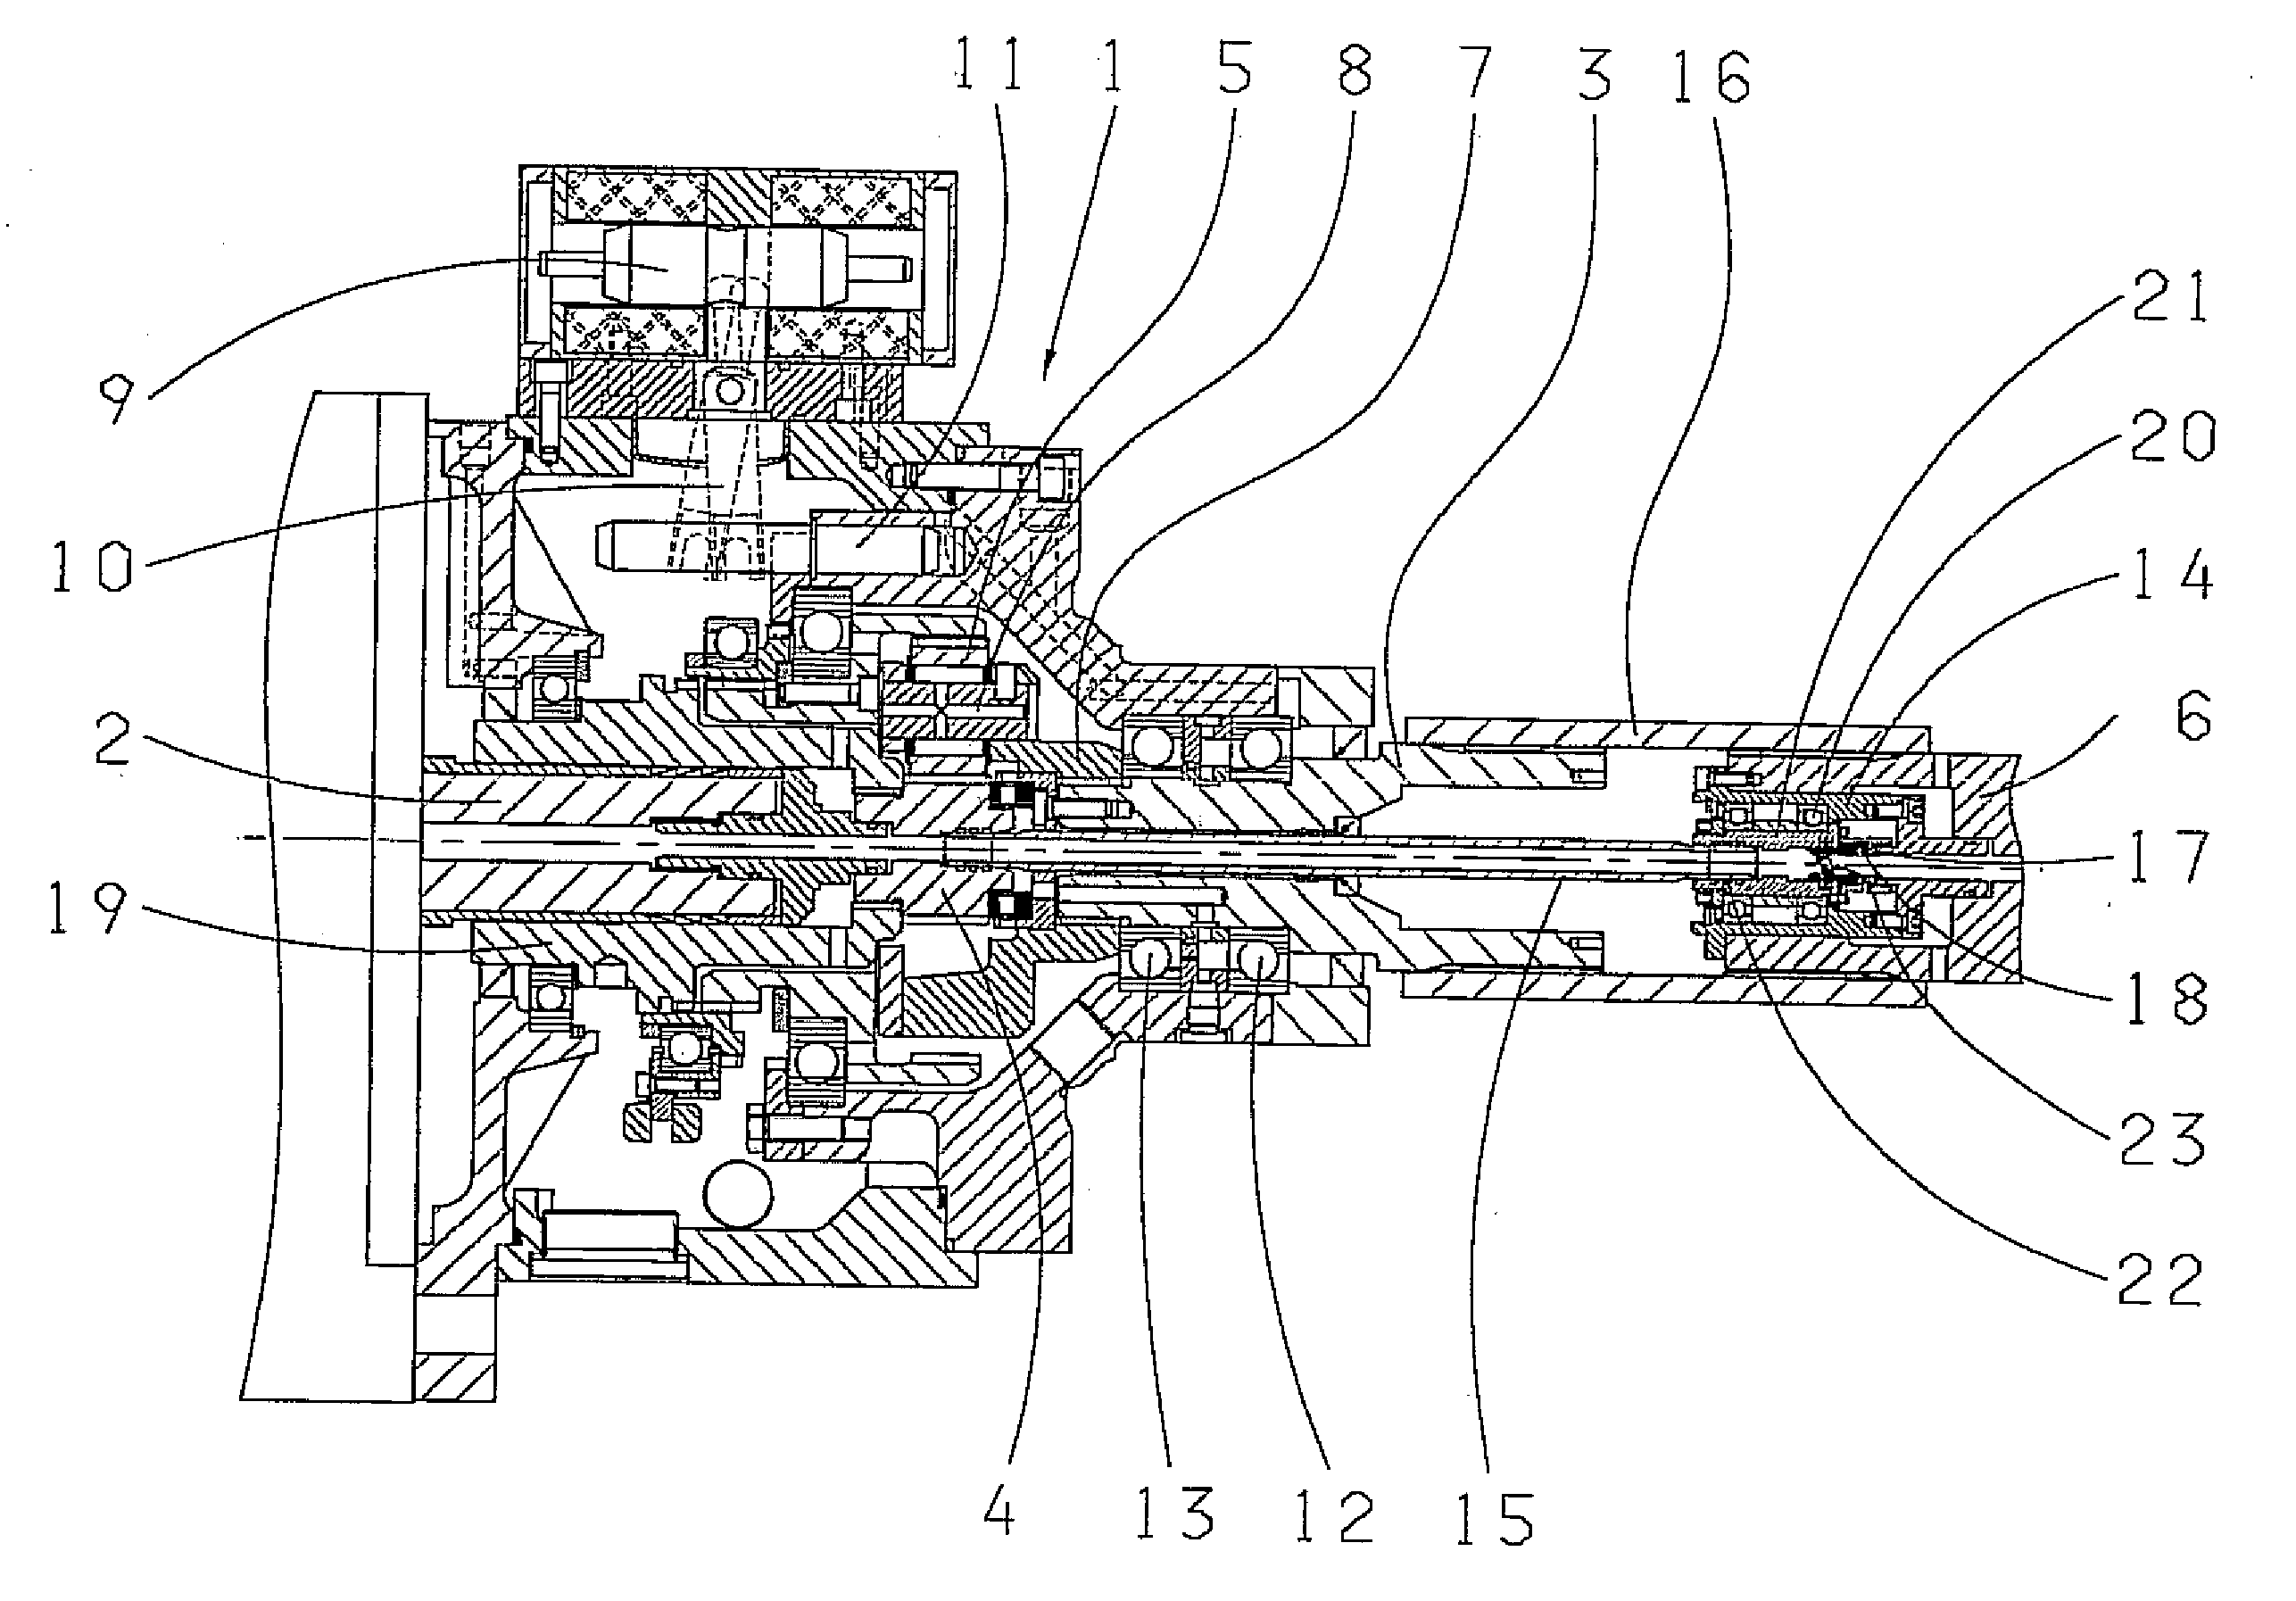 Machine Tool Comprising a Rotary Transmission Leadthrough Between the Driven Gear and the Spindle